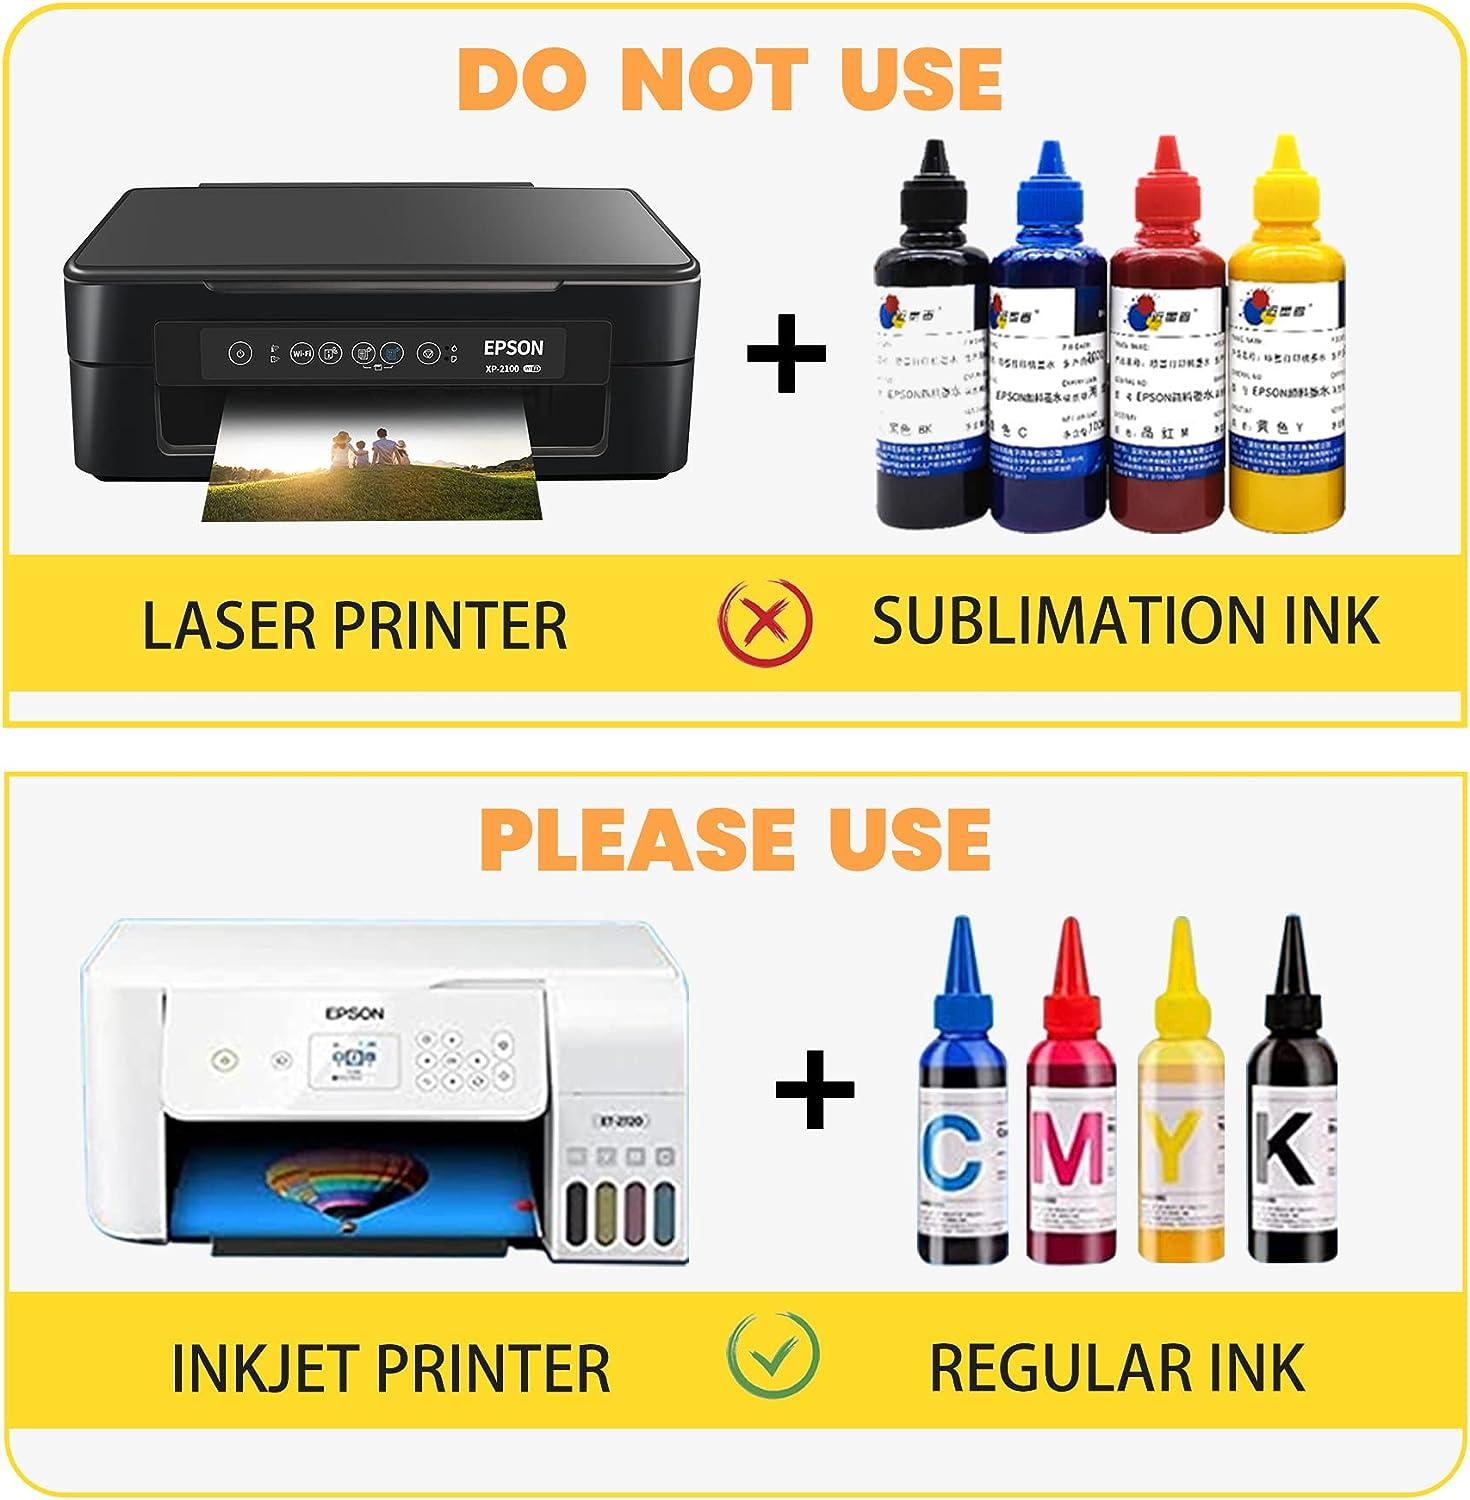  A-SUB 110 Sheets Sublimation Paper and 10 Sheets Dark Cotton  Fabric Iron-on Heat Transfer Paper : Arts, Crafts & Sewing